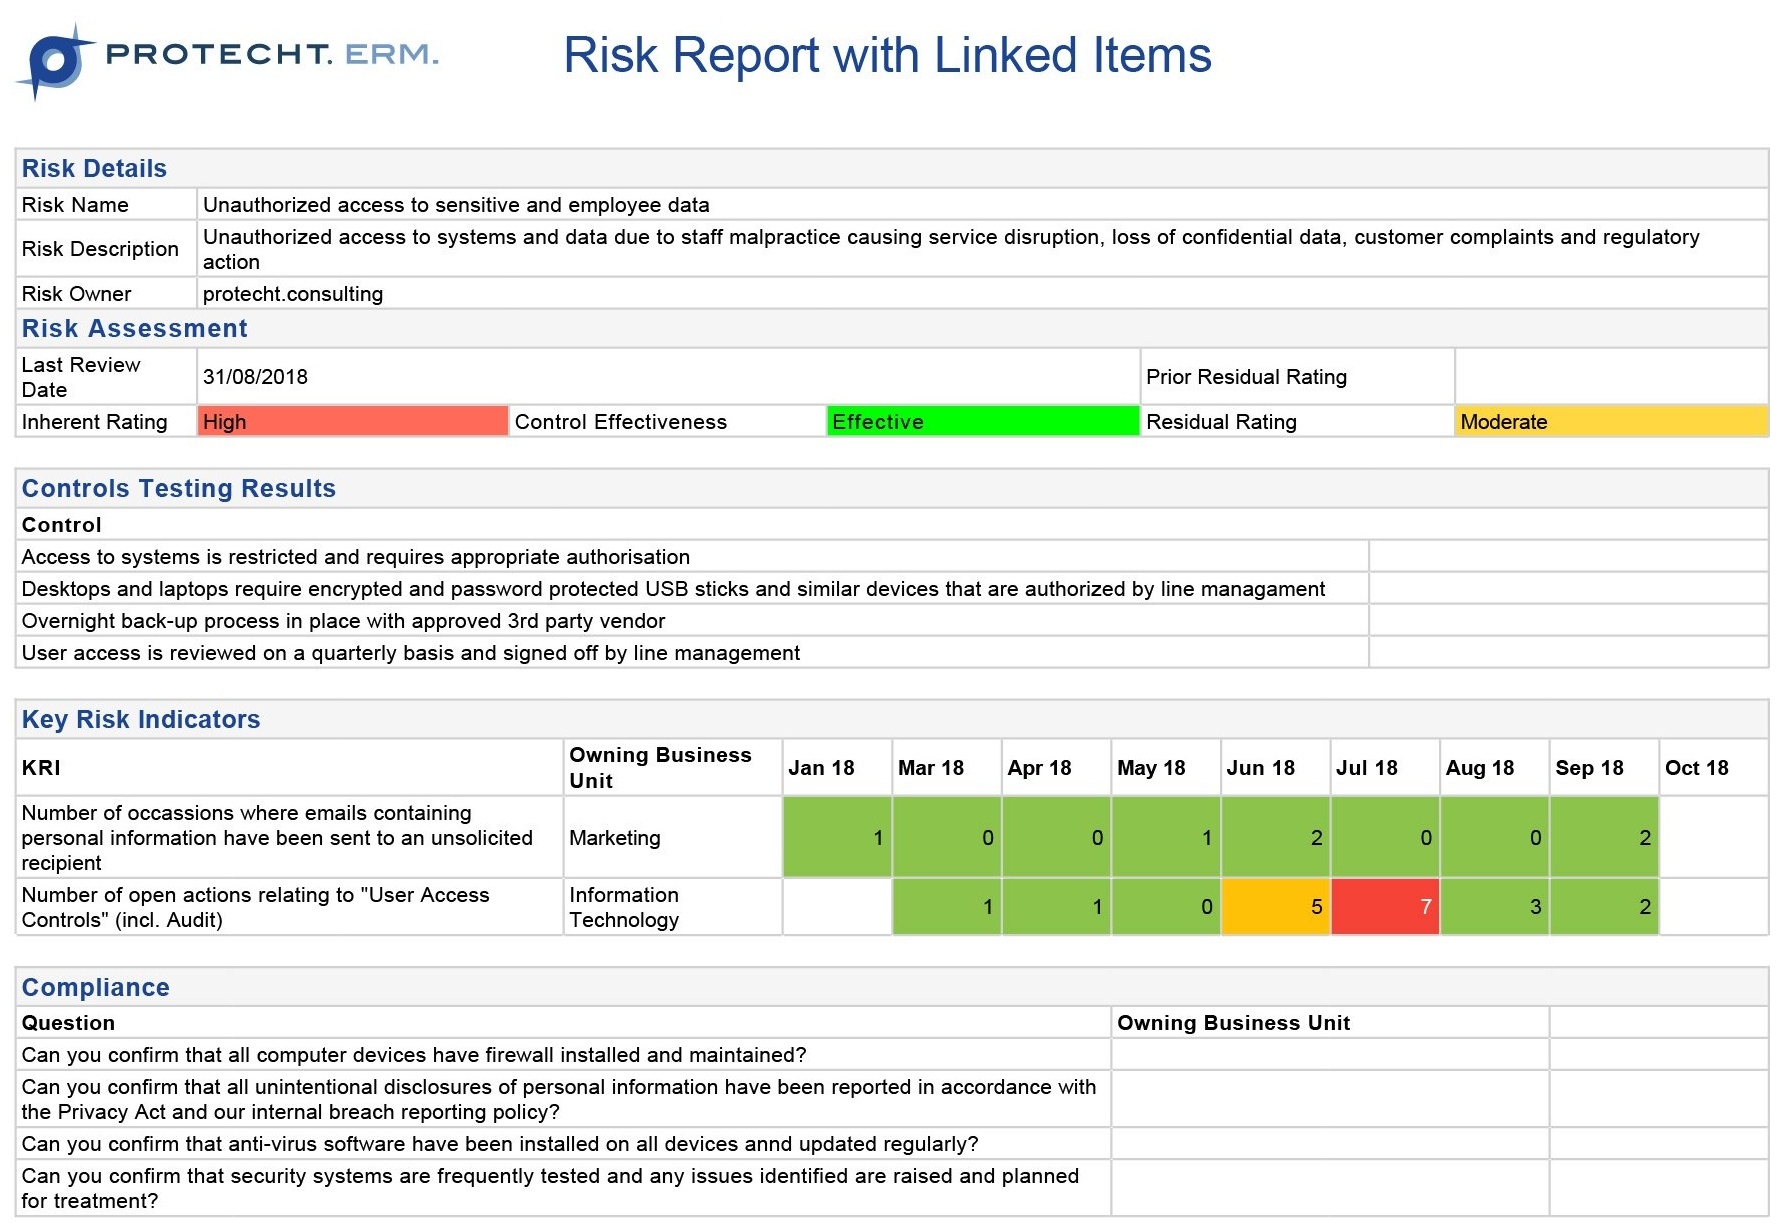 Protecht-Risk-Report-with-Linked-Items-1920-372158-edited